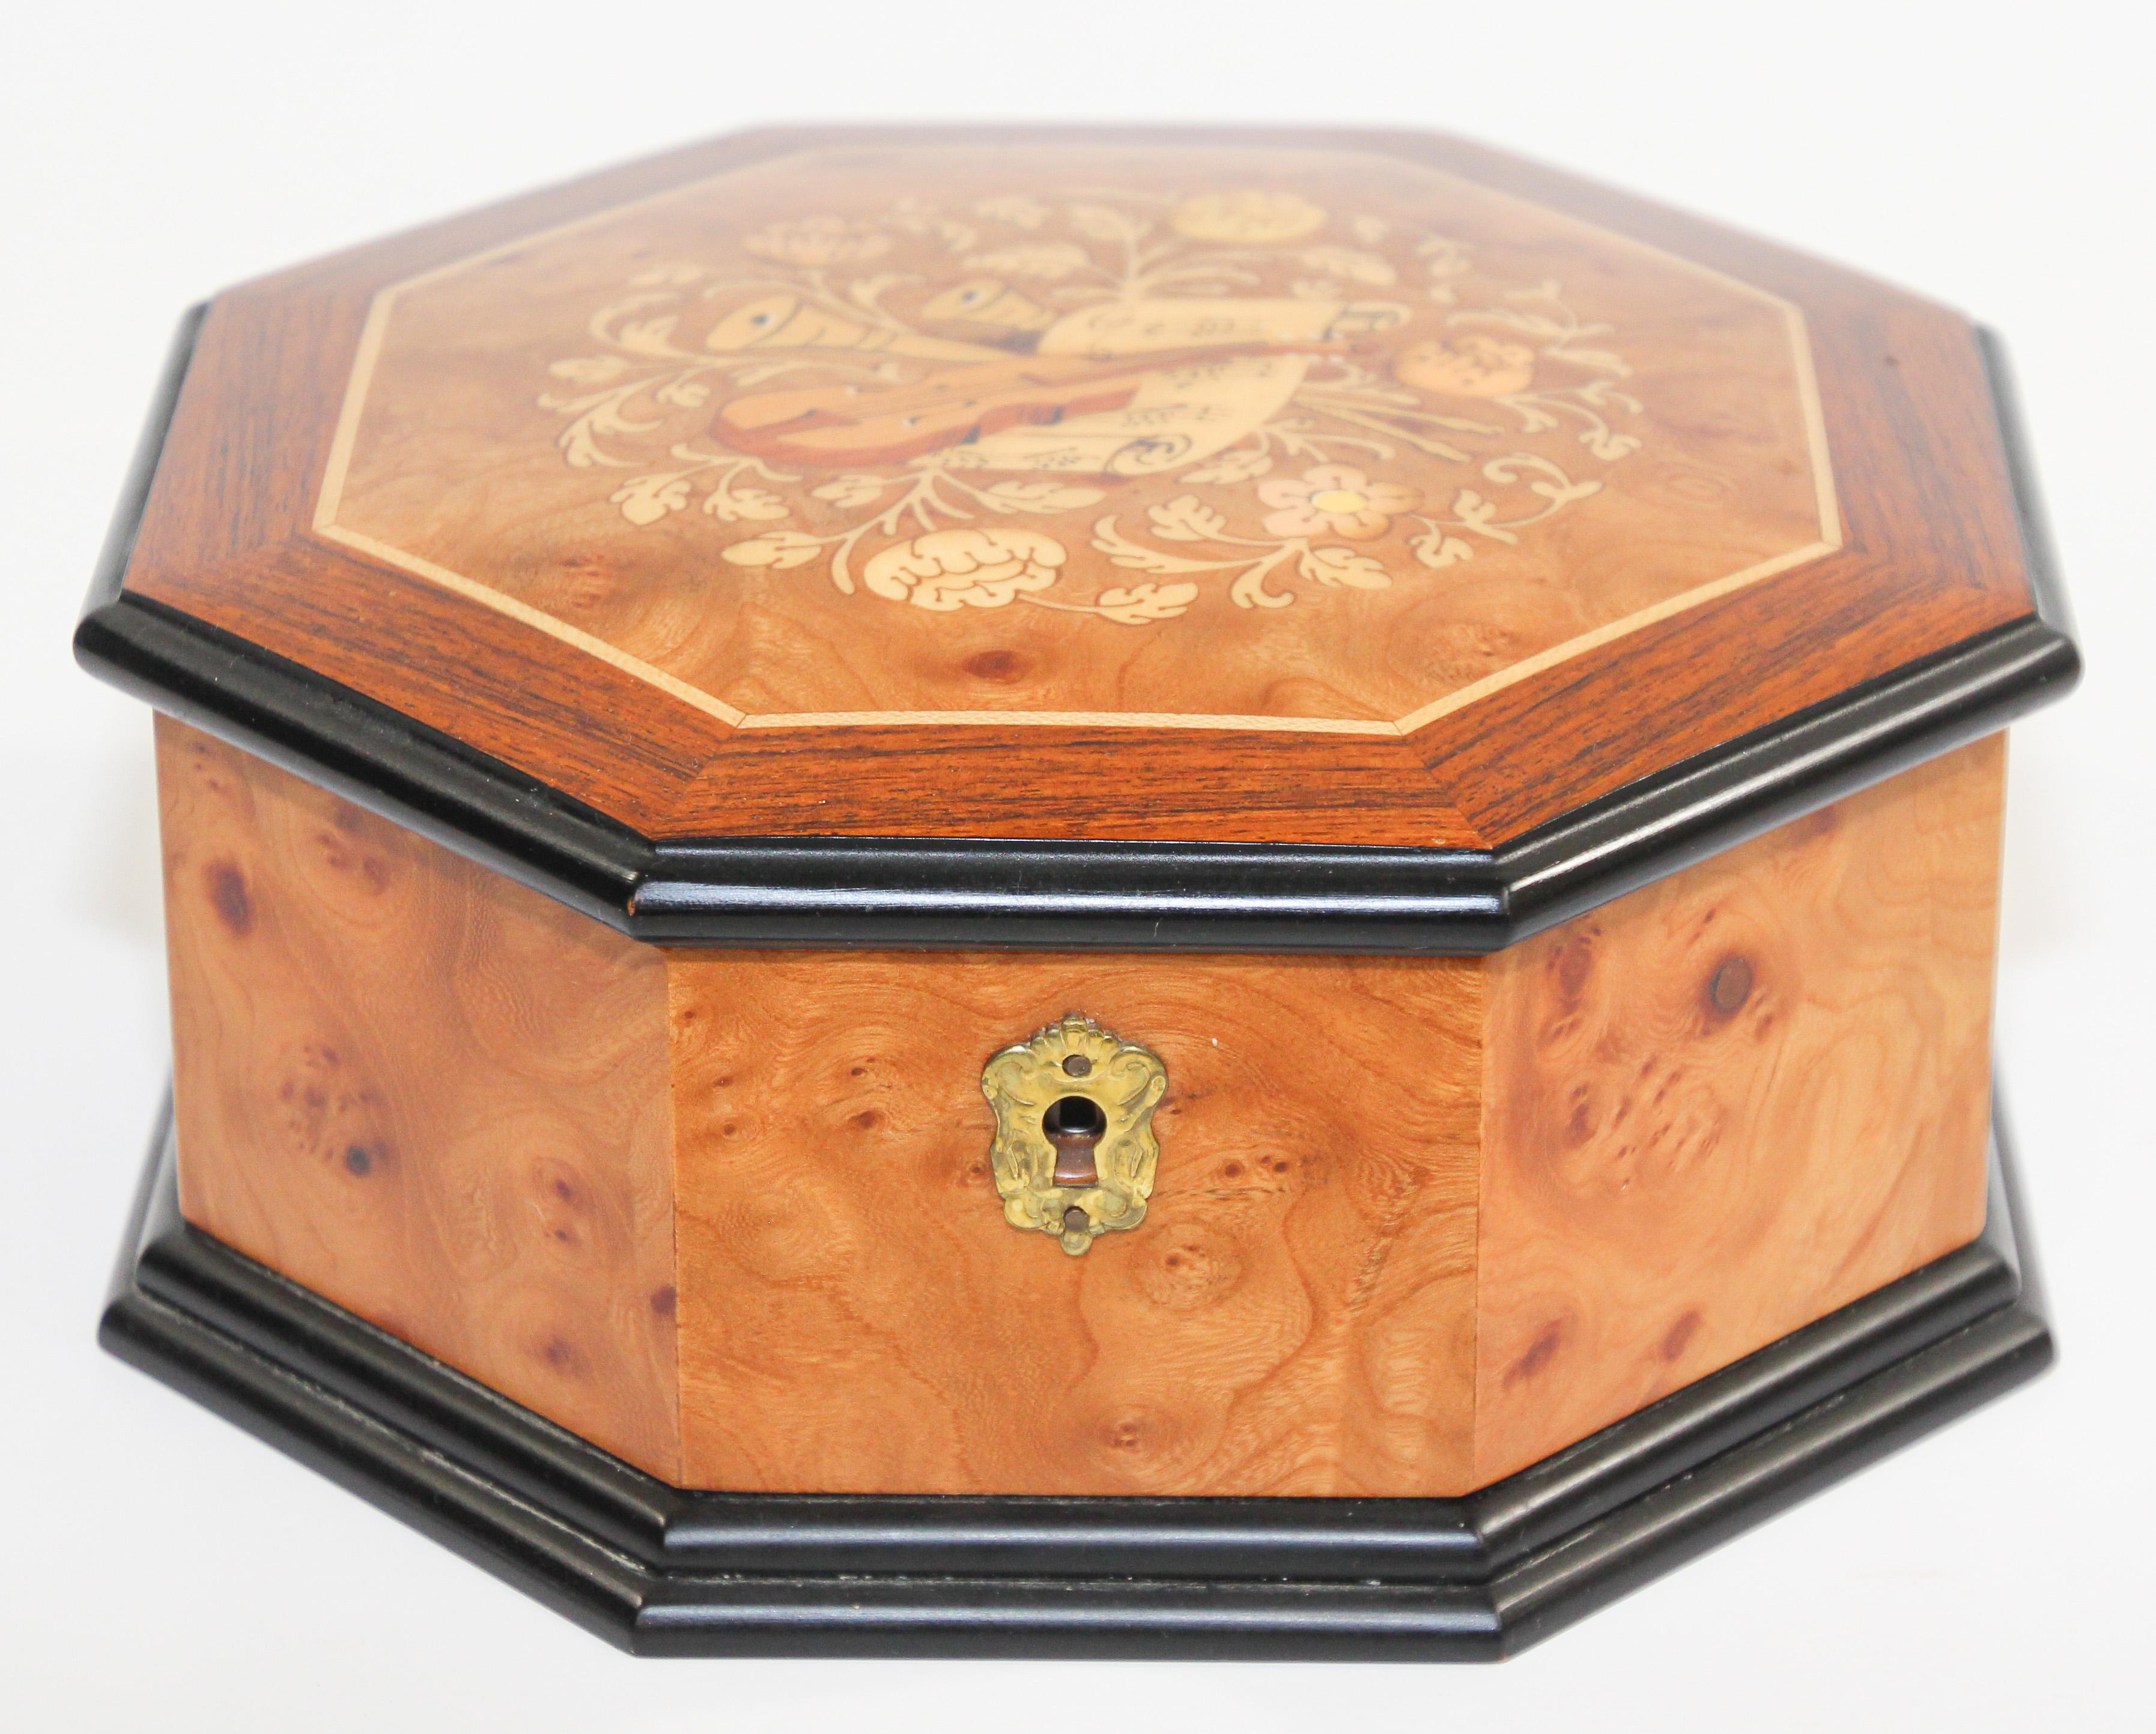 Elegant octagonal wooden music box in thuya wood.
Thuya tree is famous for rich gold and brown shades of its grain and unique exotic fragrance, similar to cedar.
Lined in brown velvet.
Hand inlaid with various precious wood top.
Upon opening, the